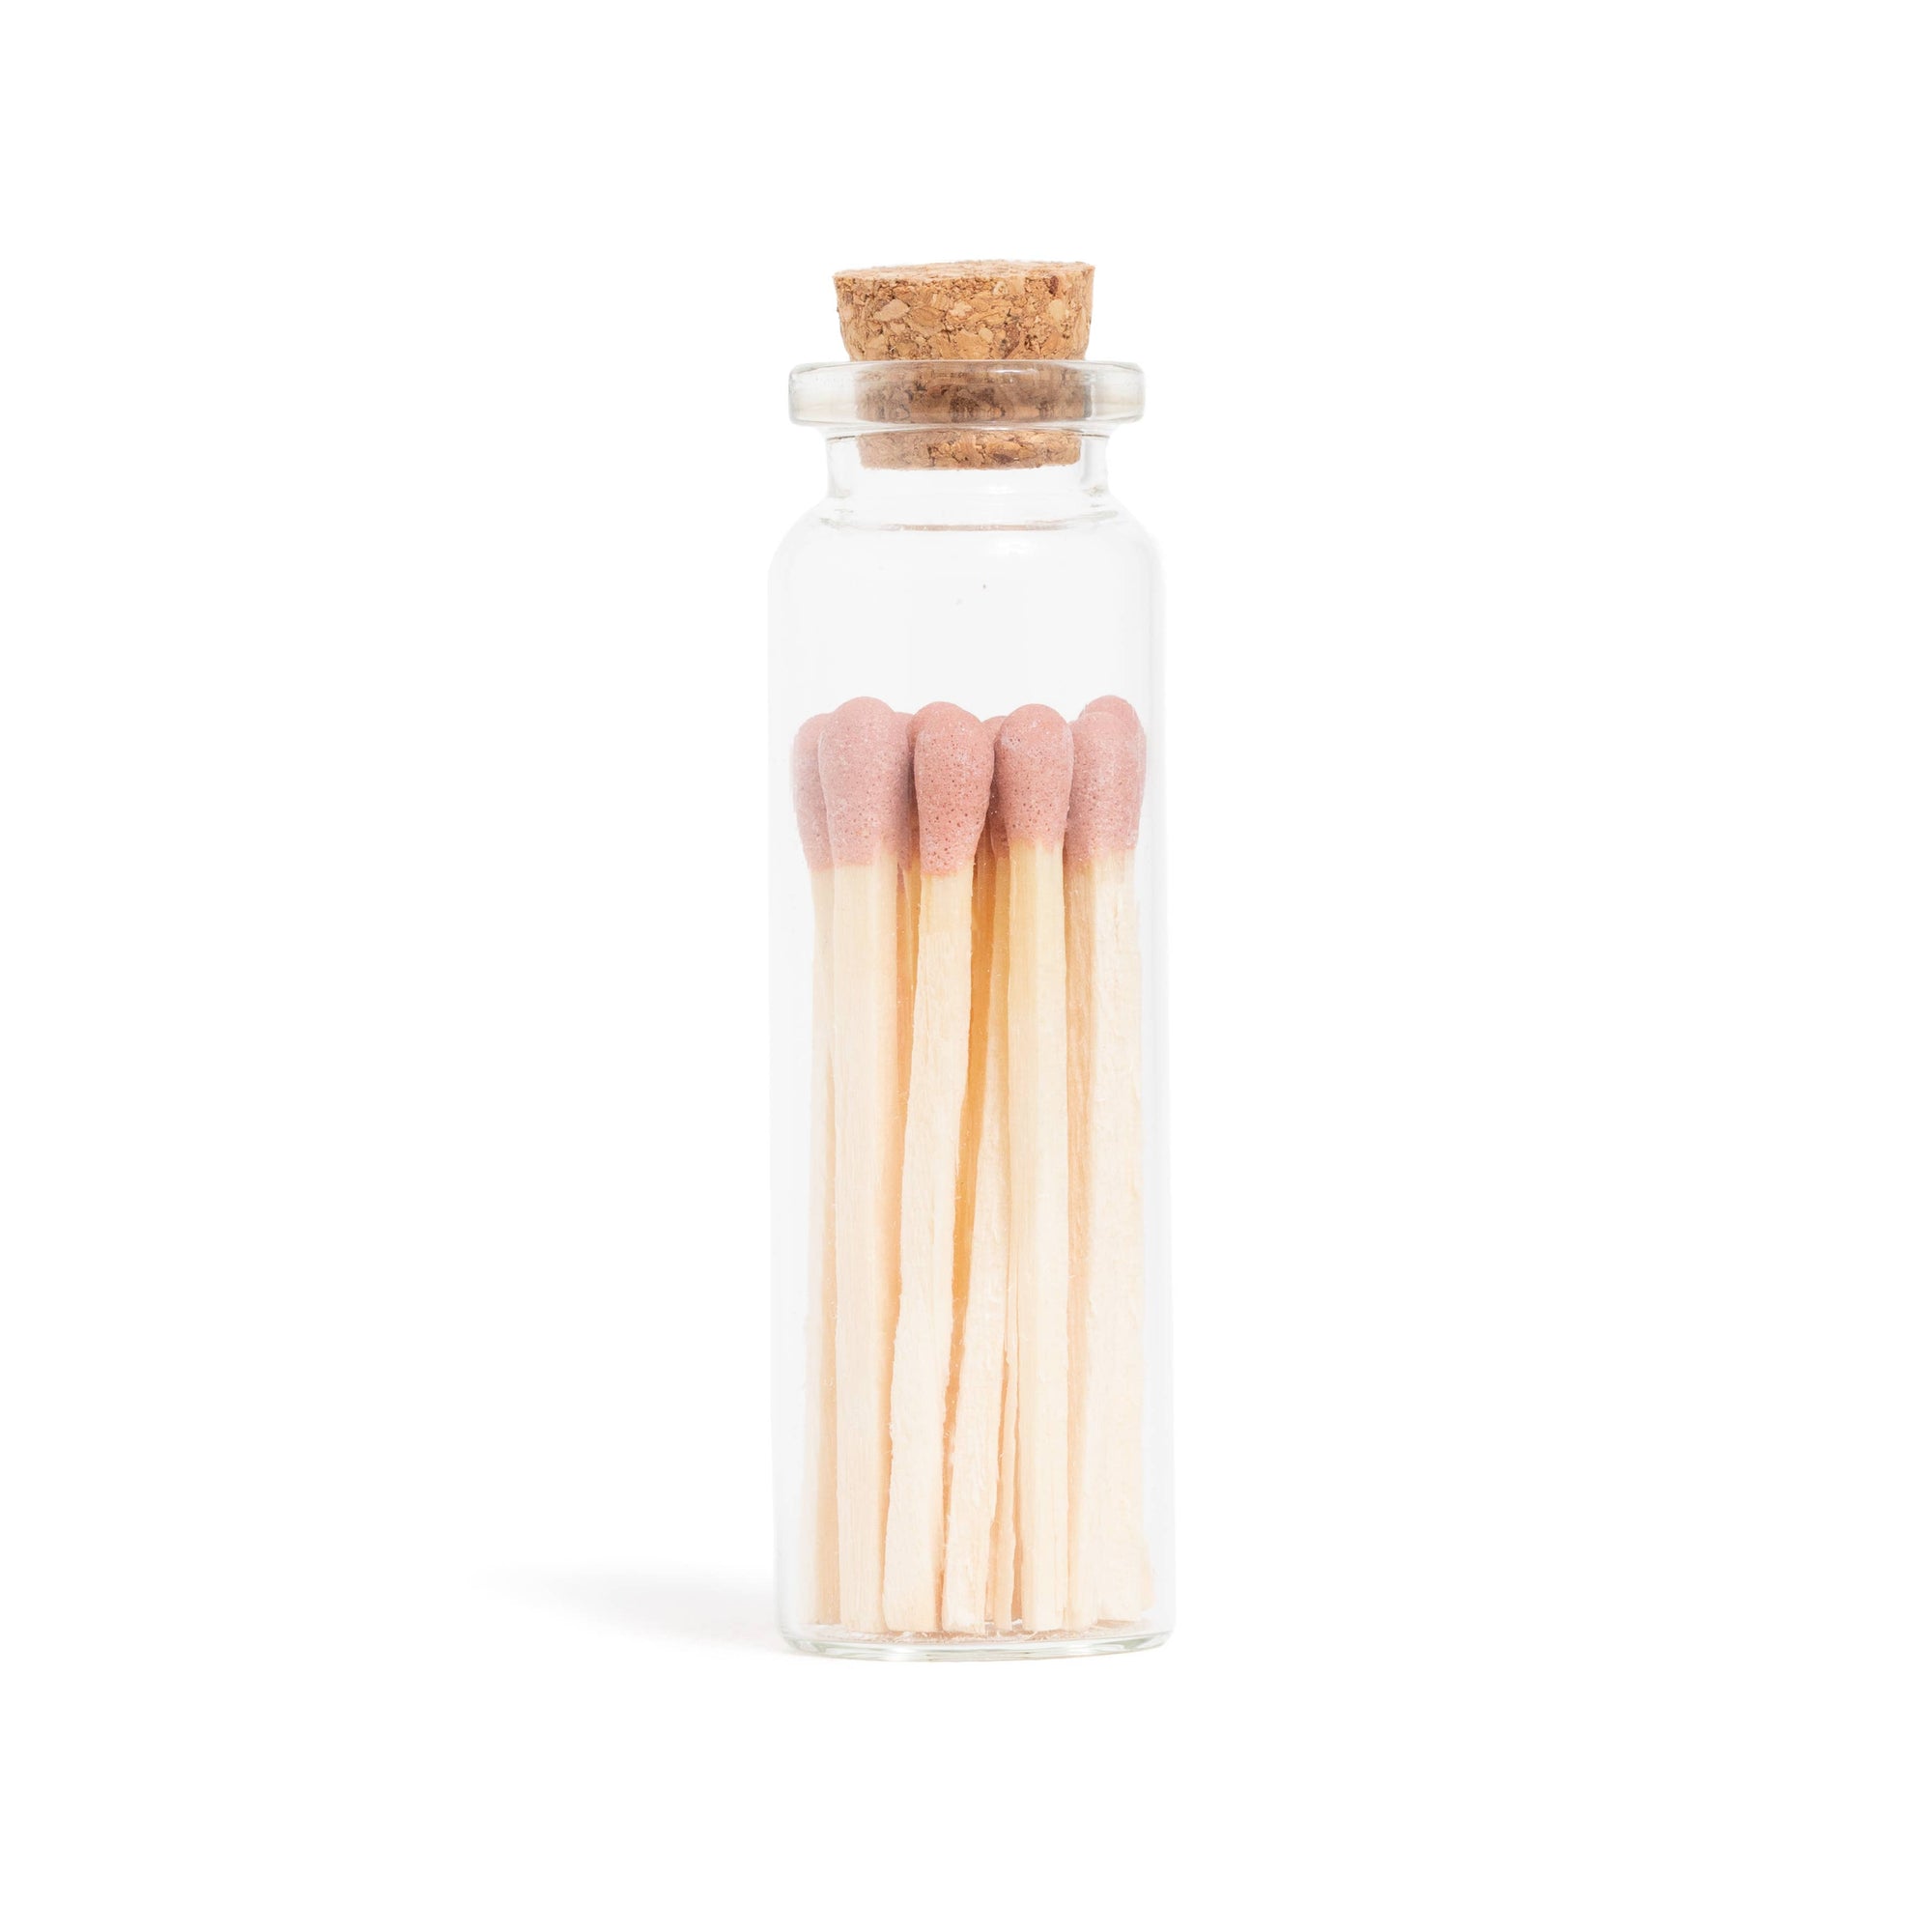 Dusty Rose Matches in Small Corked Vial